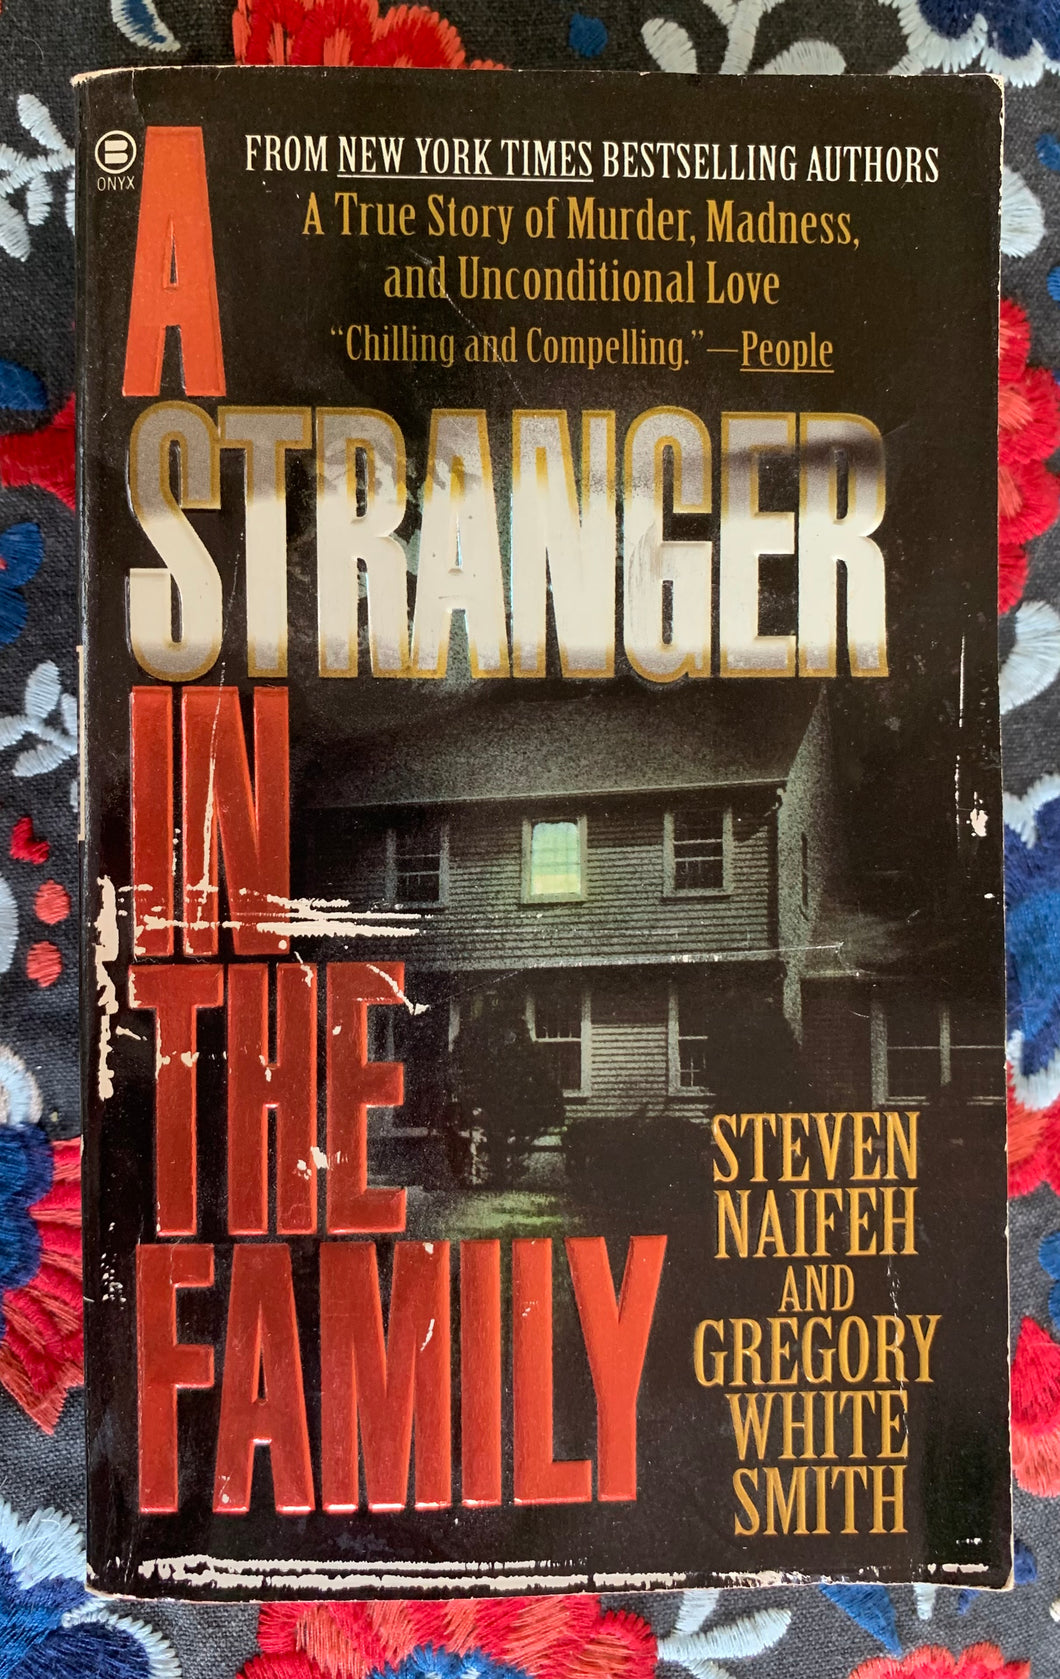 A Stranger in the Family: A True Story of Murder, Madness, and Unconditional Love